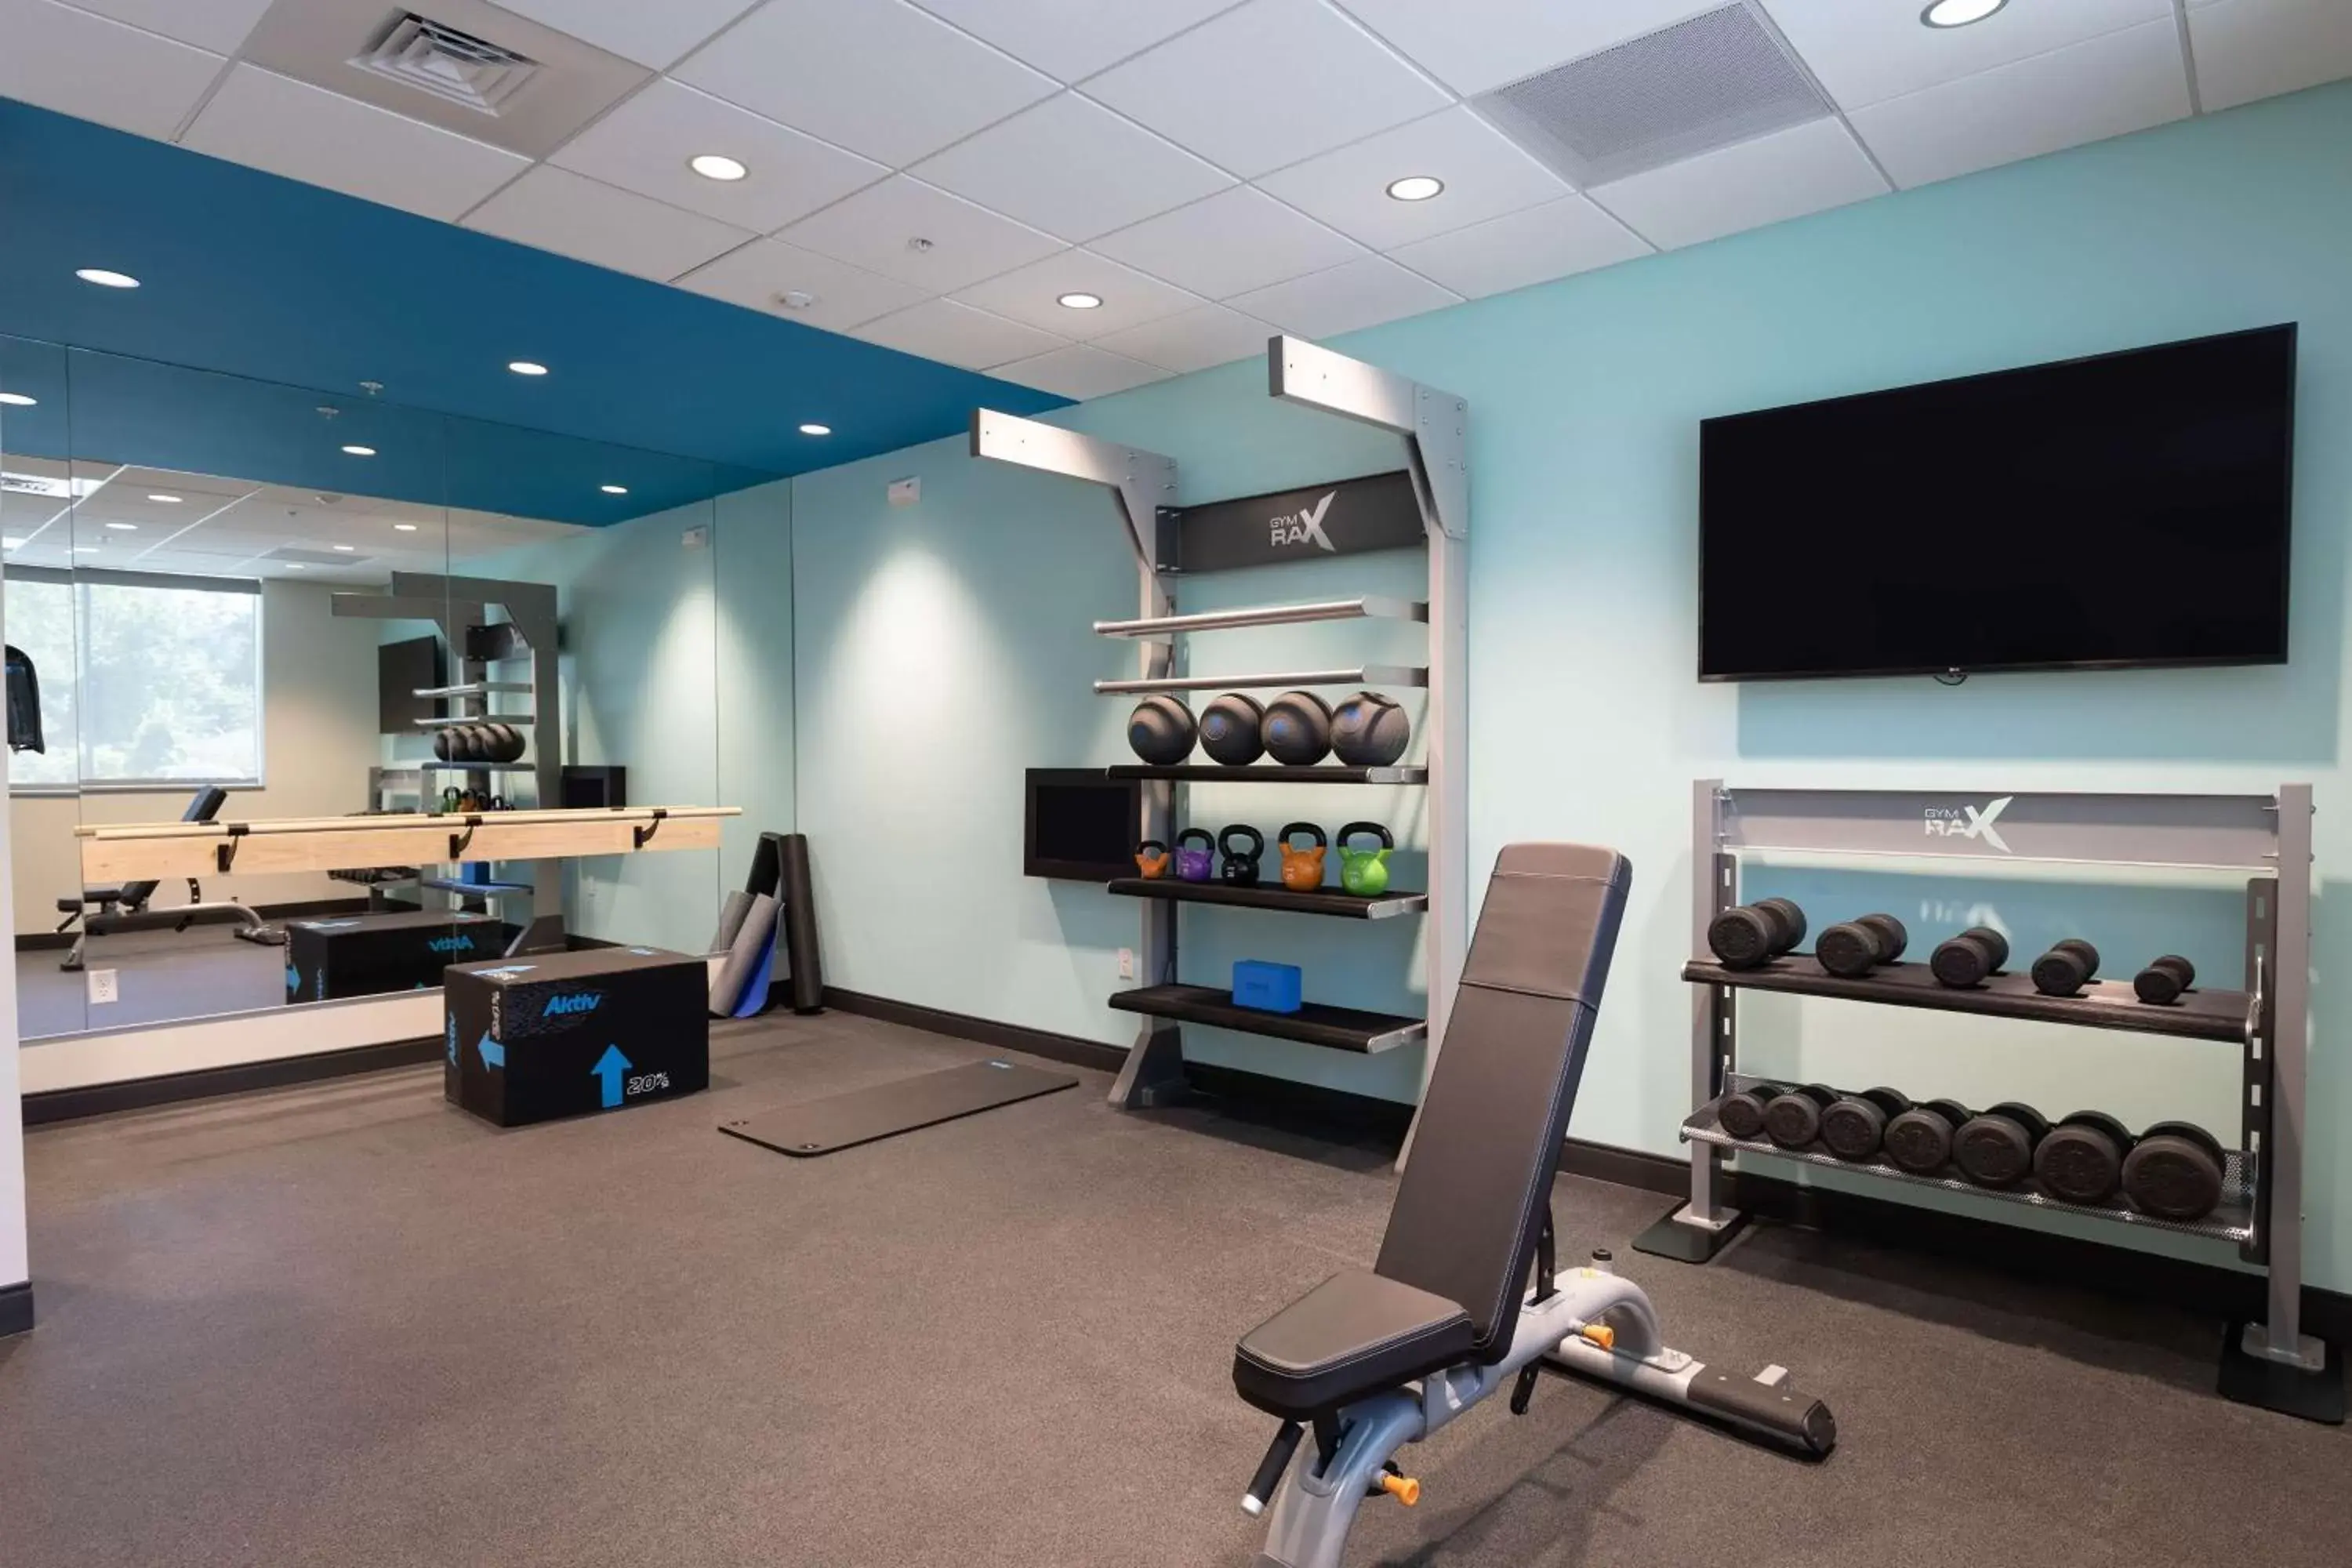 Fitness centre/facilities, Fitness Center/Facilities in Tru By Hilton Eugene, Or